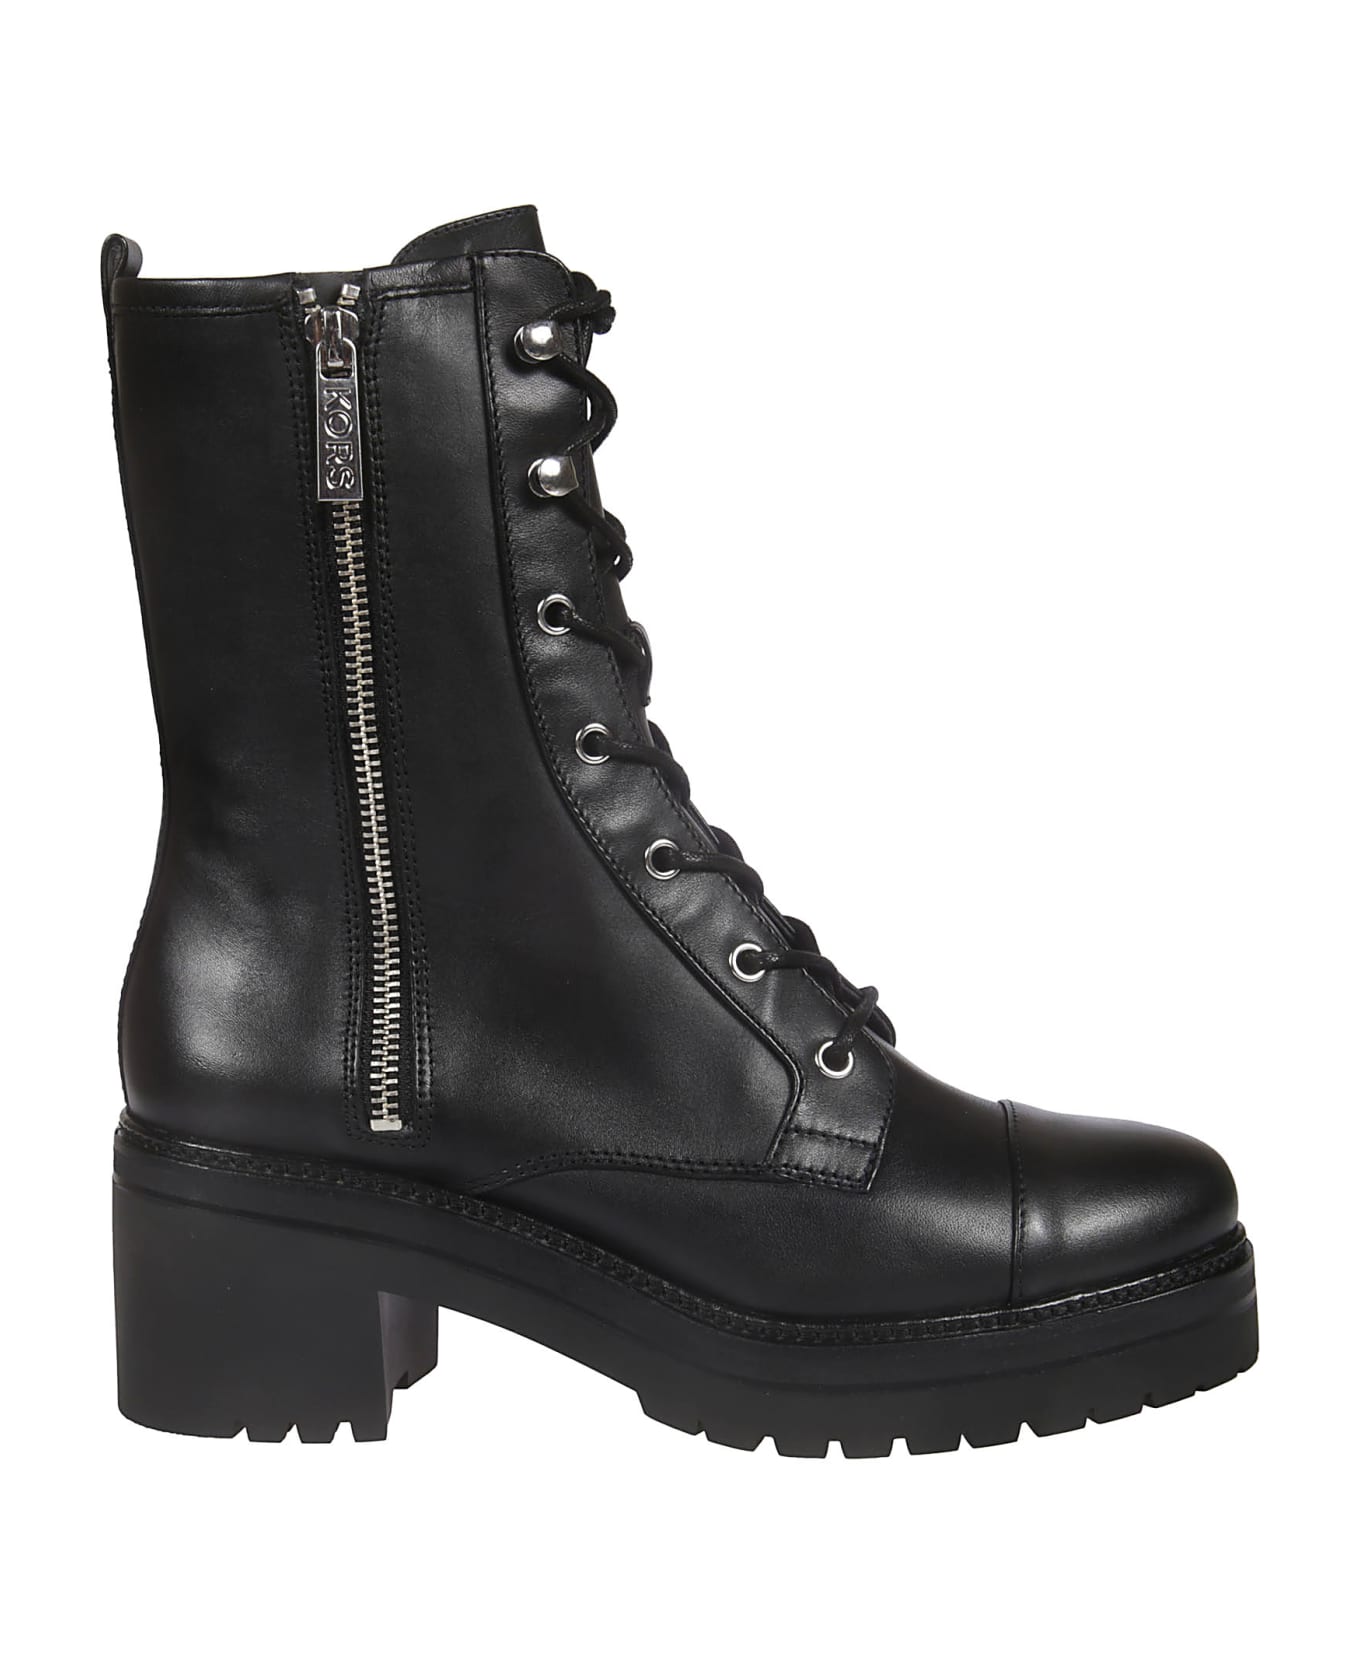 Michael Kors Anaka Lace Up Boots | italist